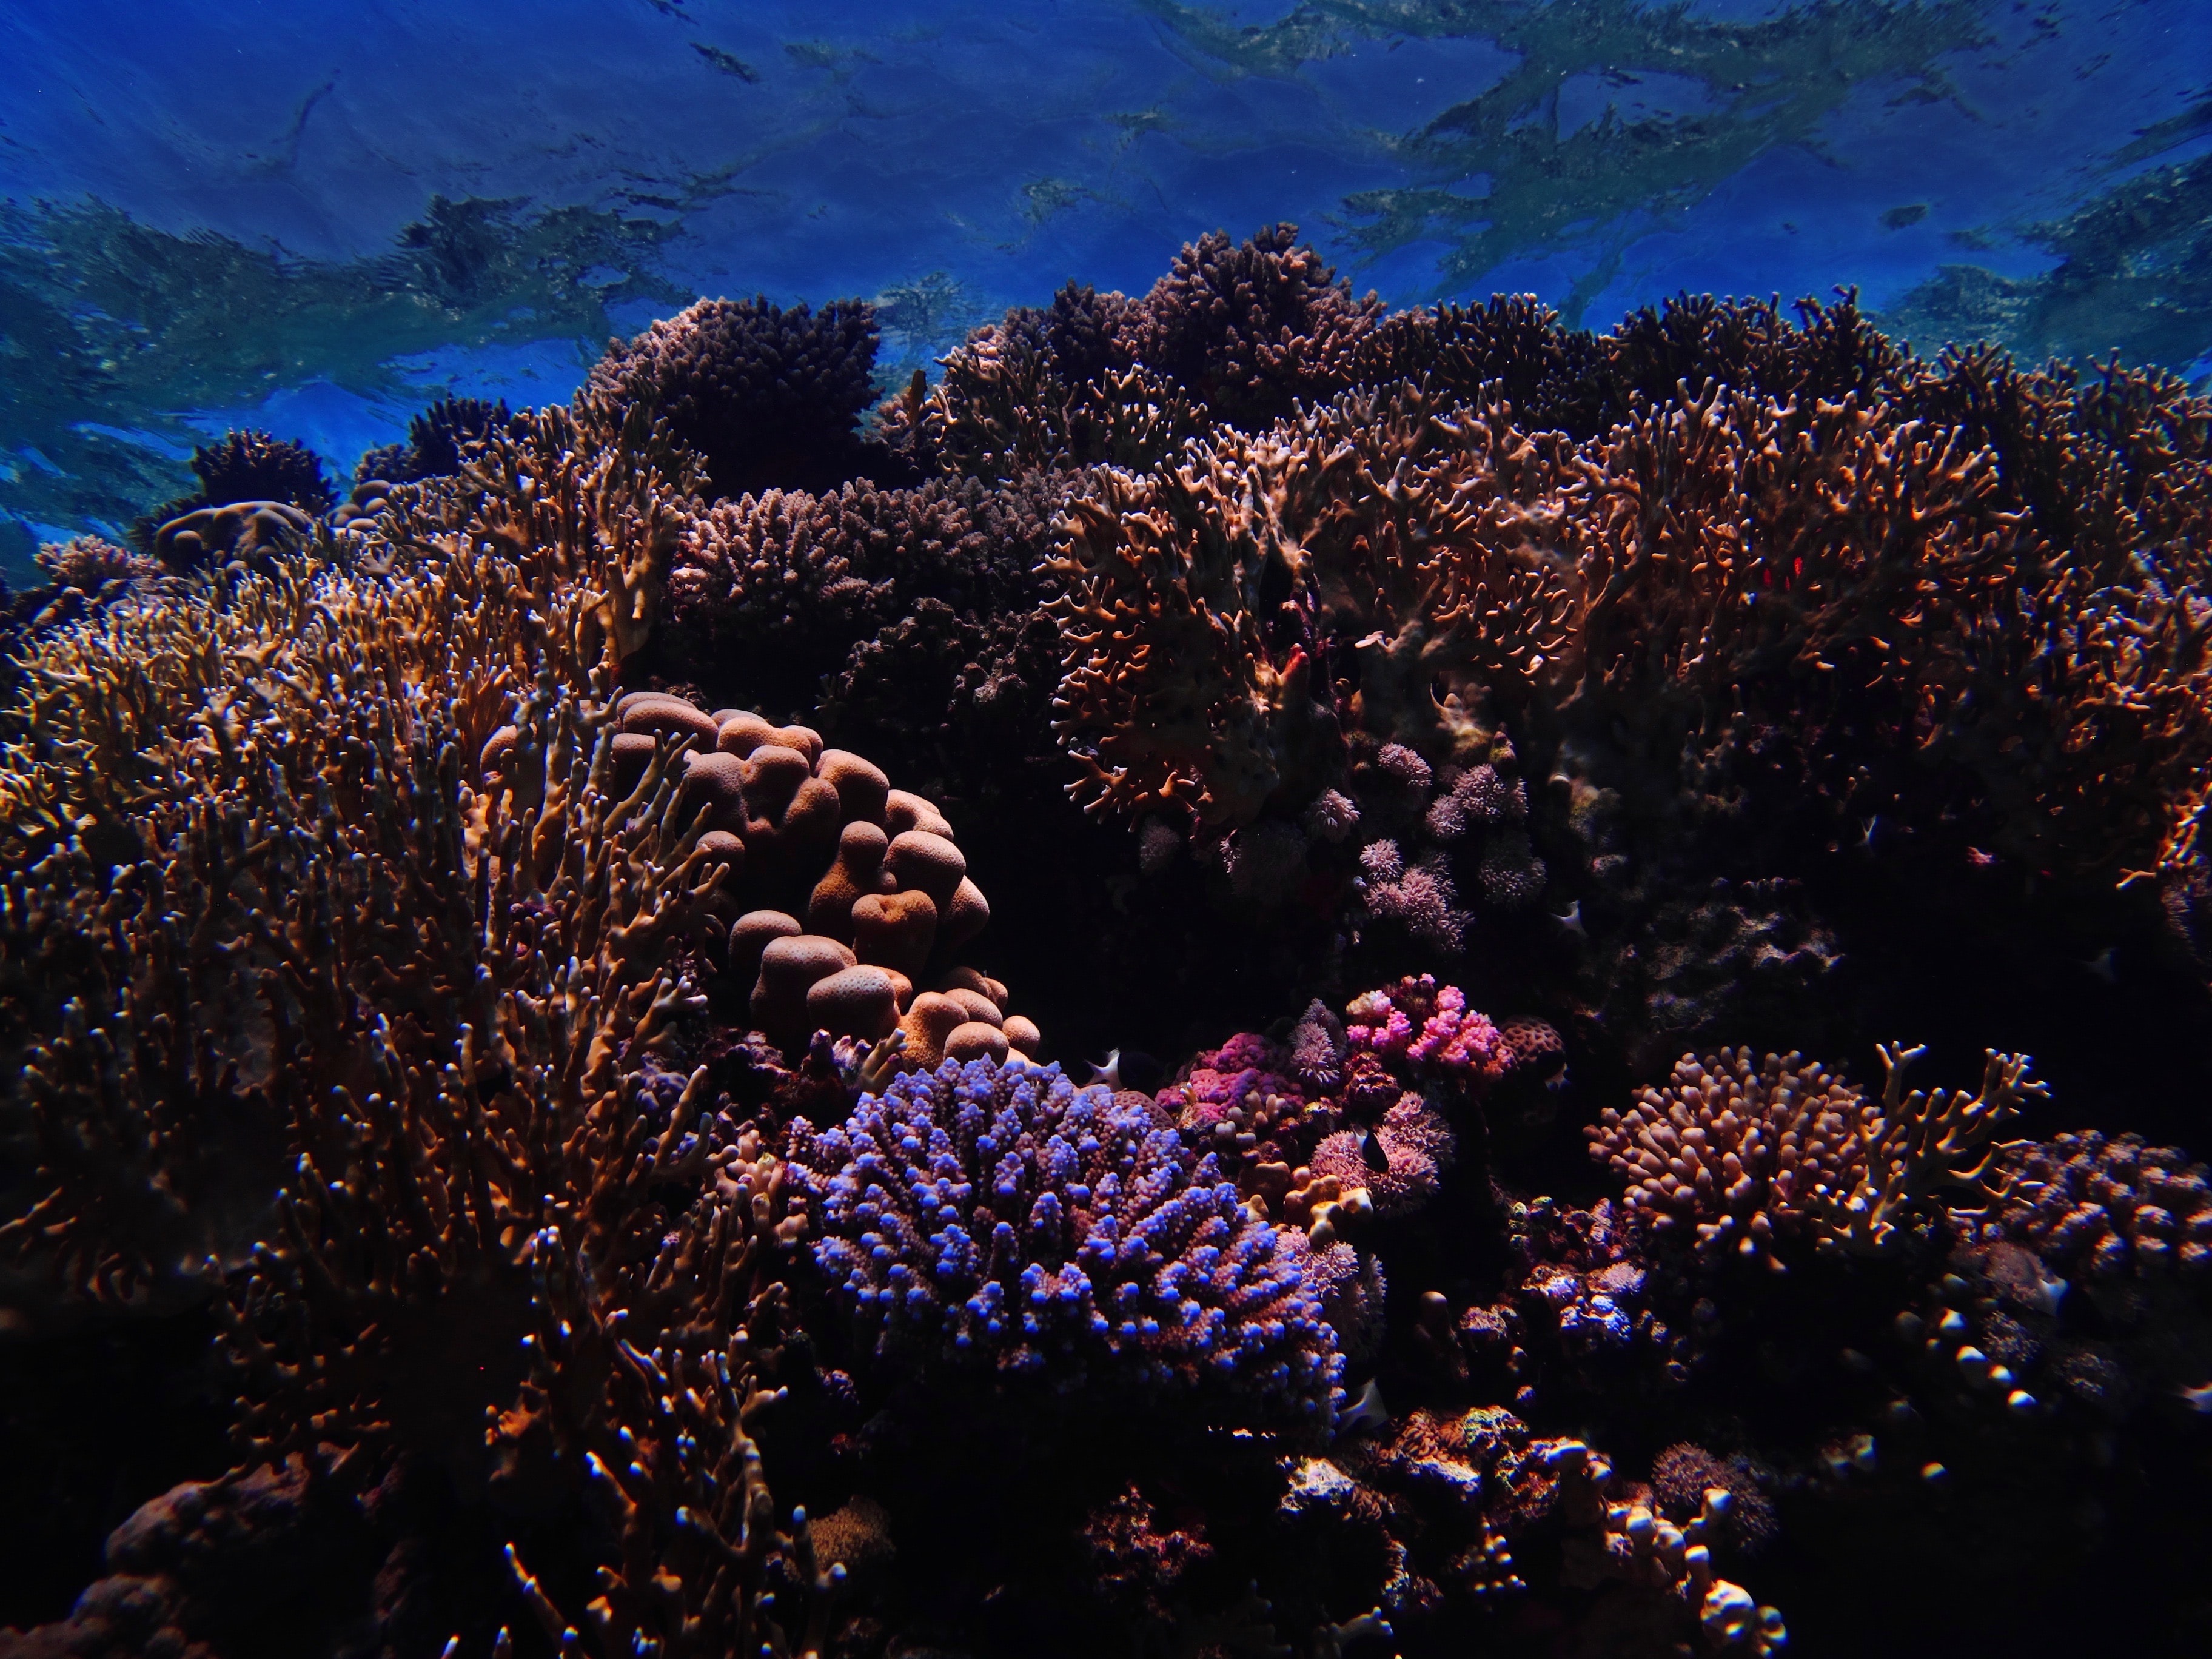 How the world is coming together to save coral reefs